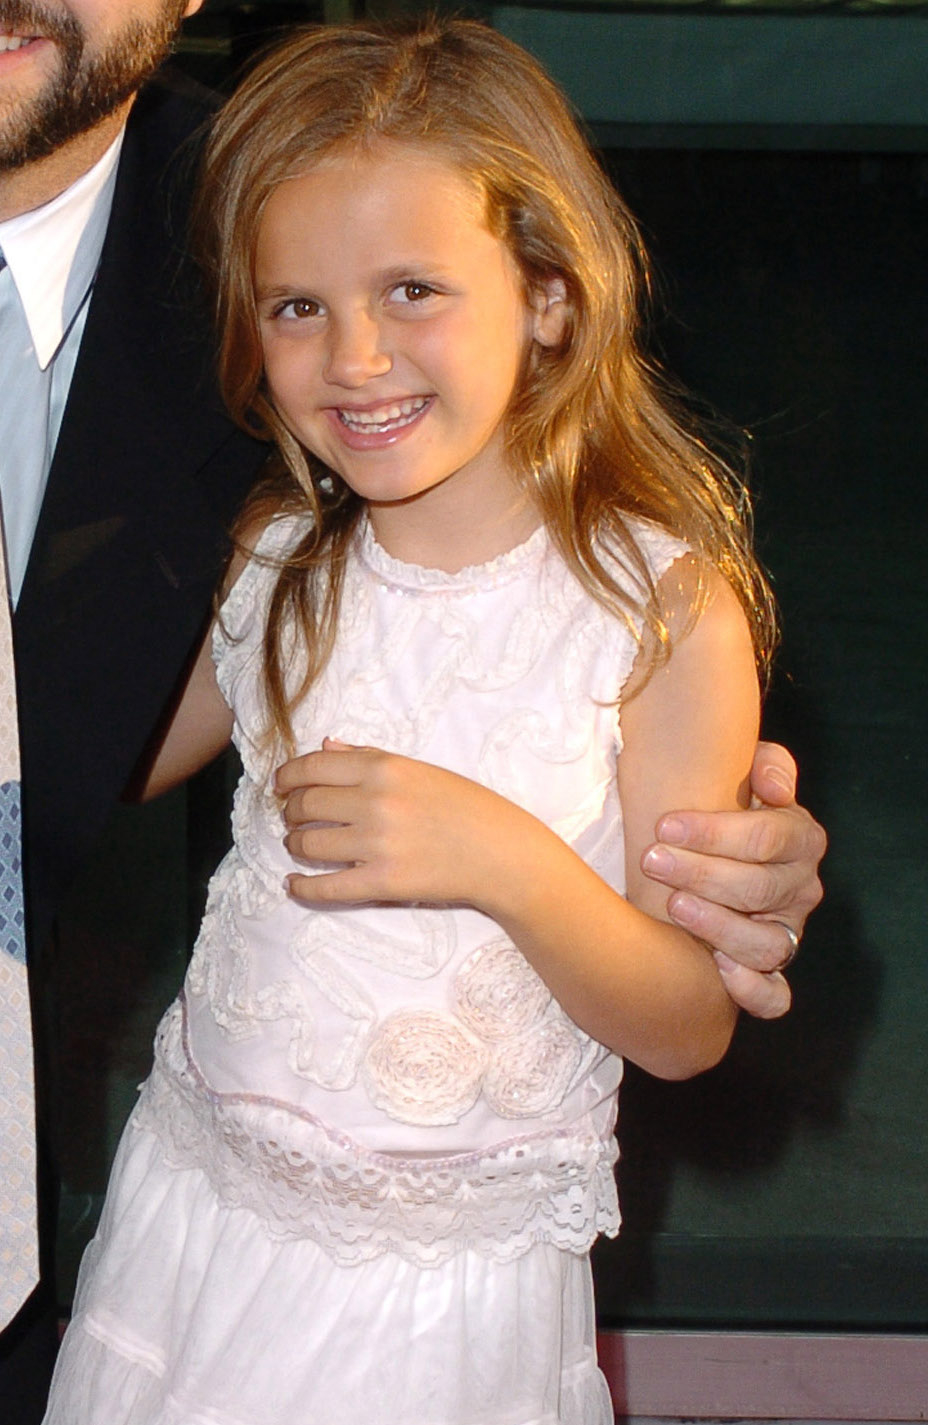 Young Maude Apatow